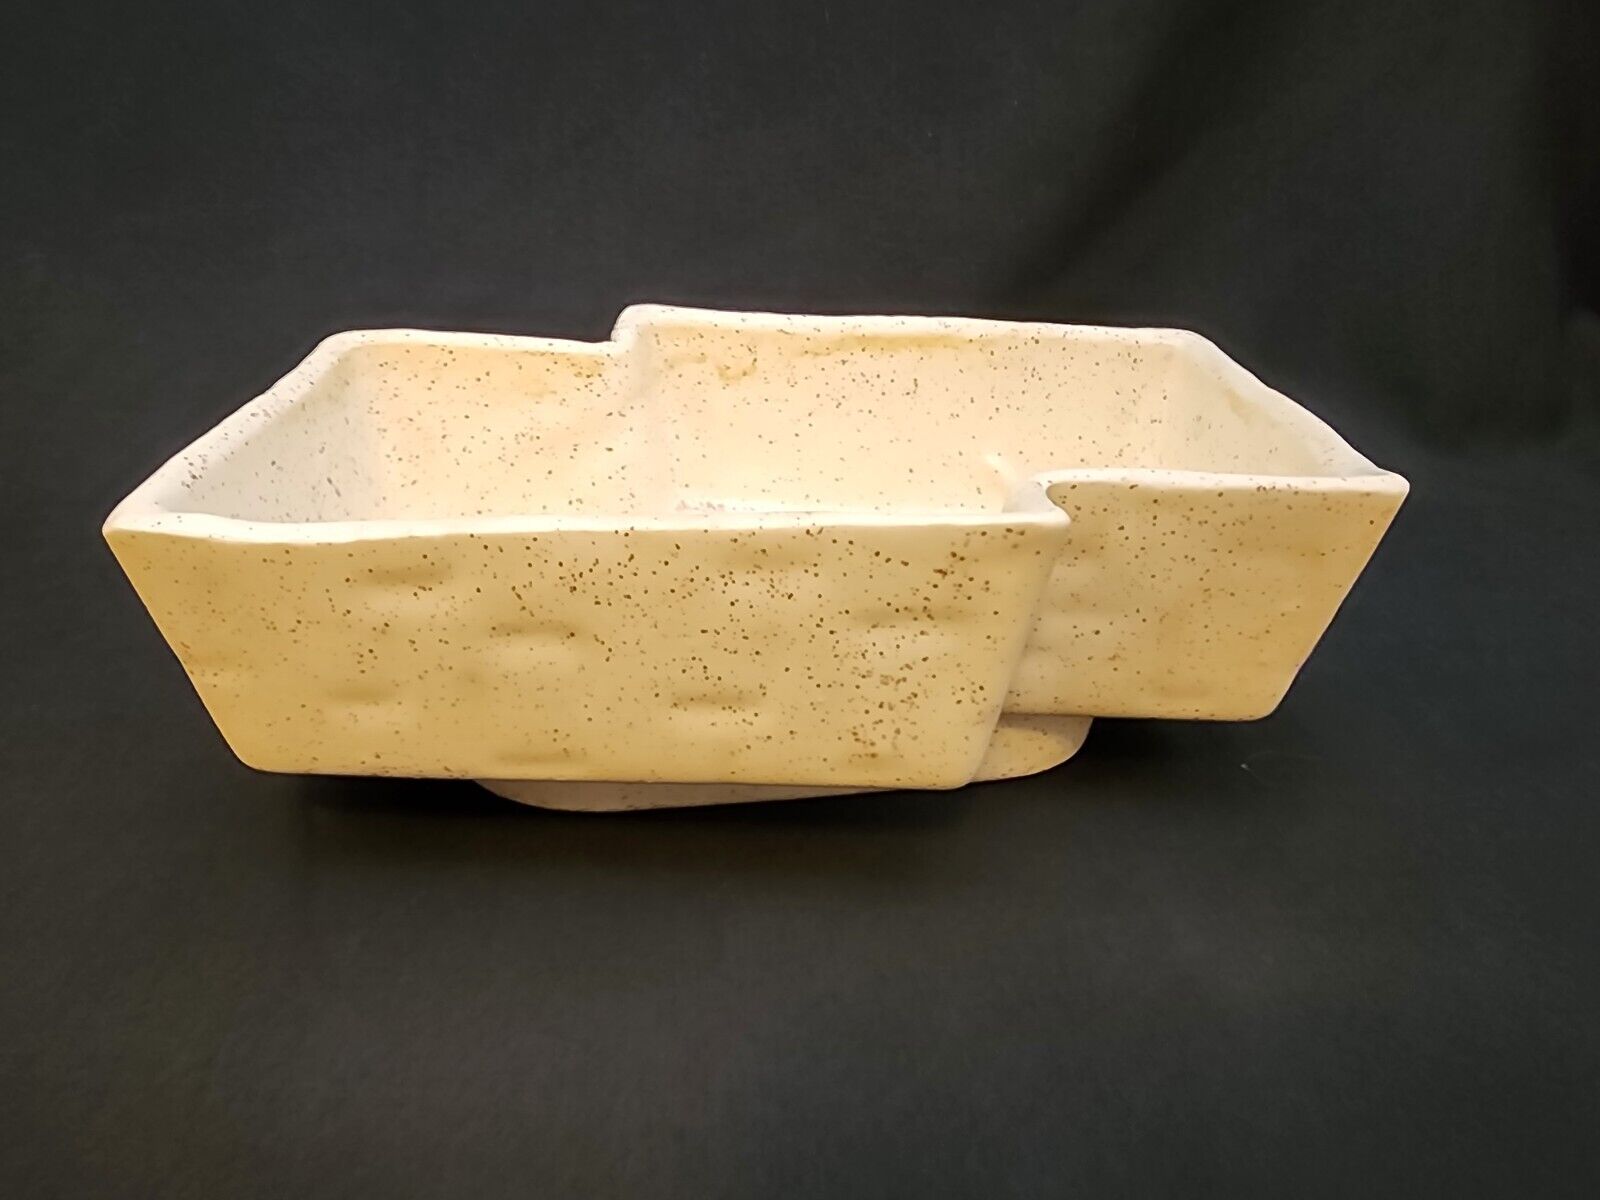 Vintage UPCO Ungemach Pottery Company #274 Flower Planter Speckled Ivory B22